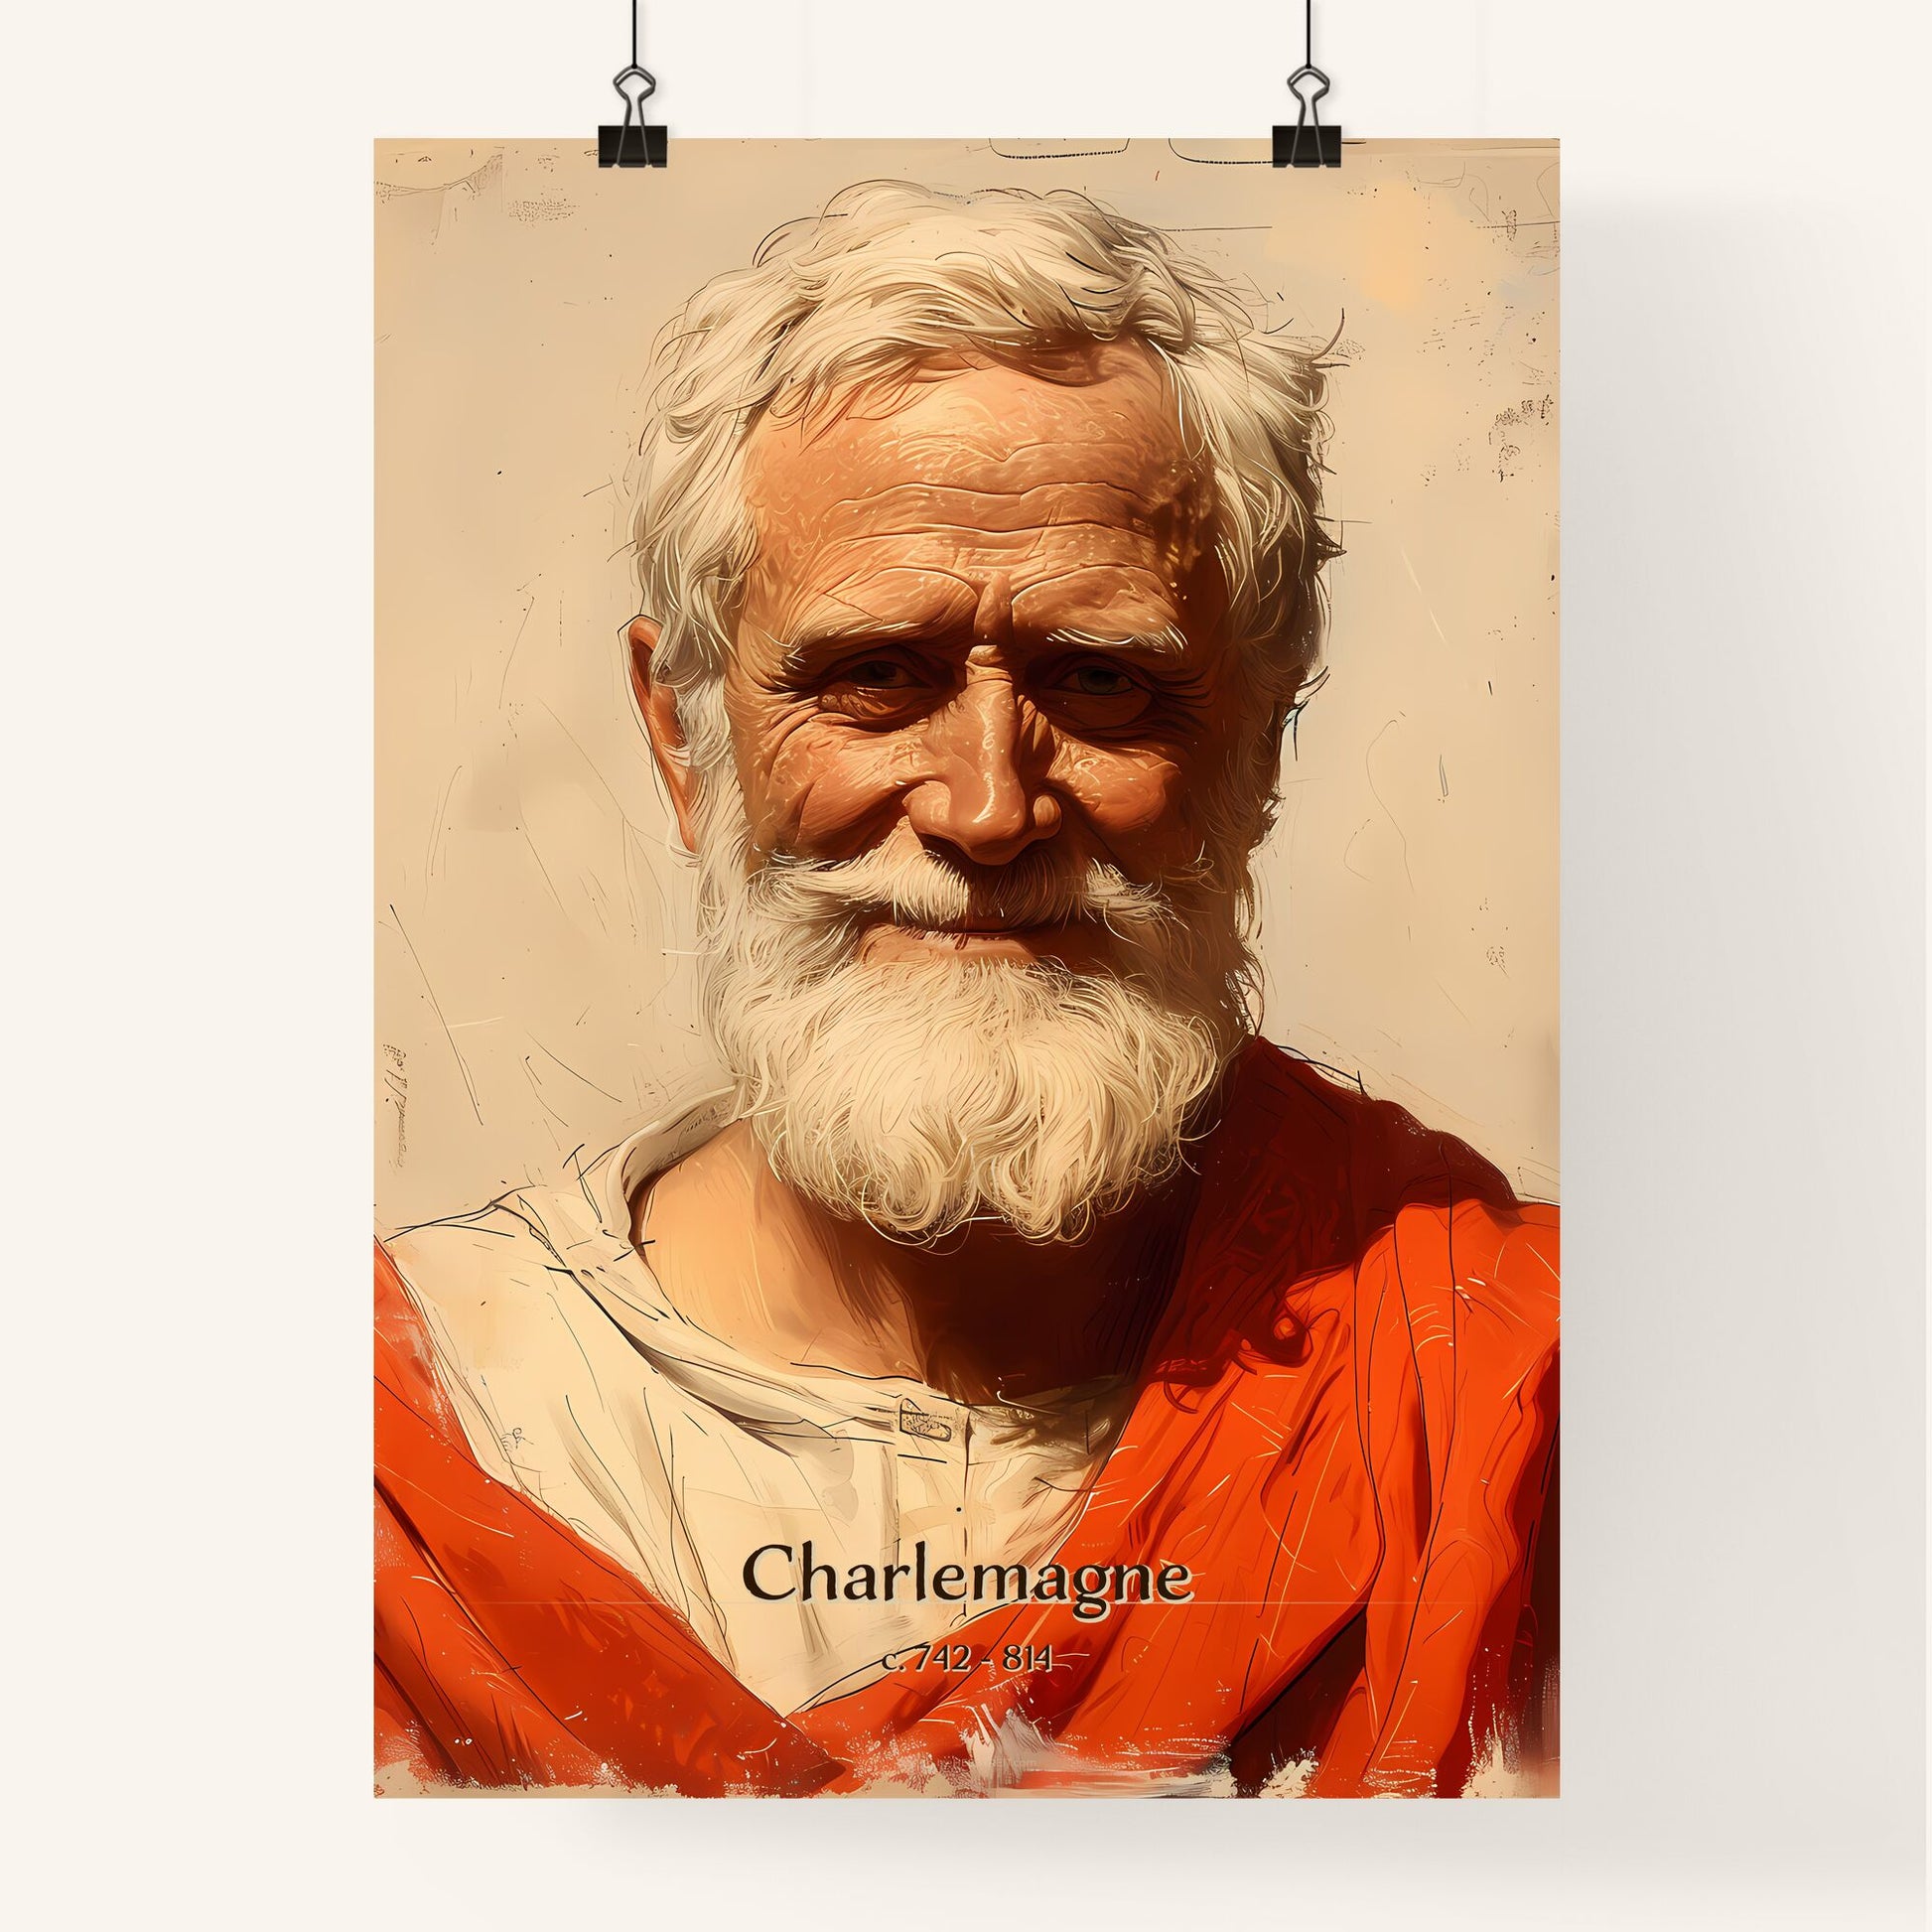 Charlemagne, c. 742 - 814, A Poster of a man with a beard and white hair Default Title